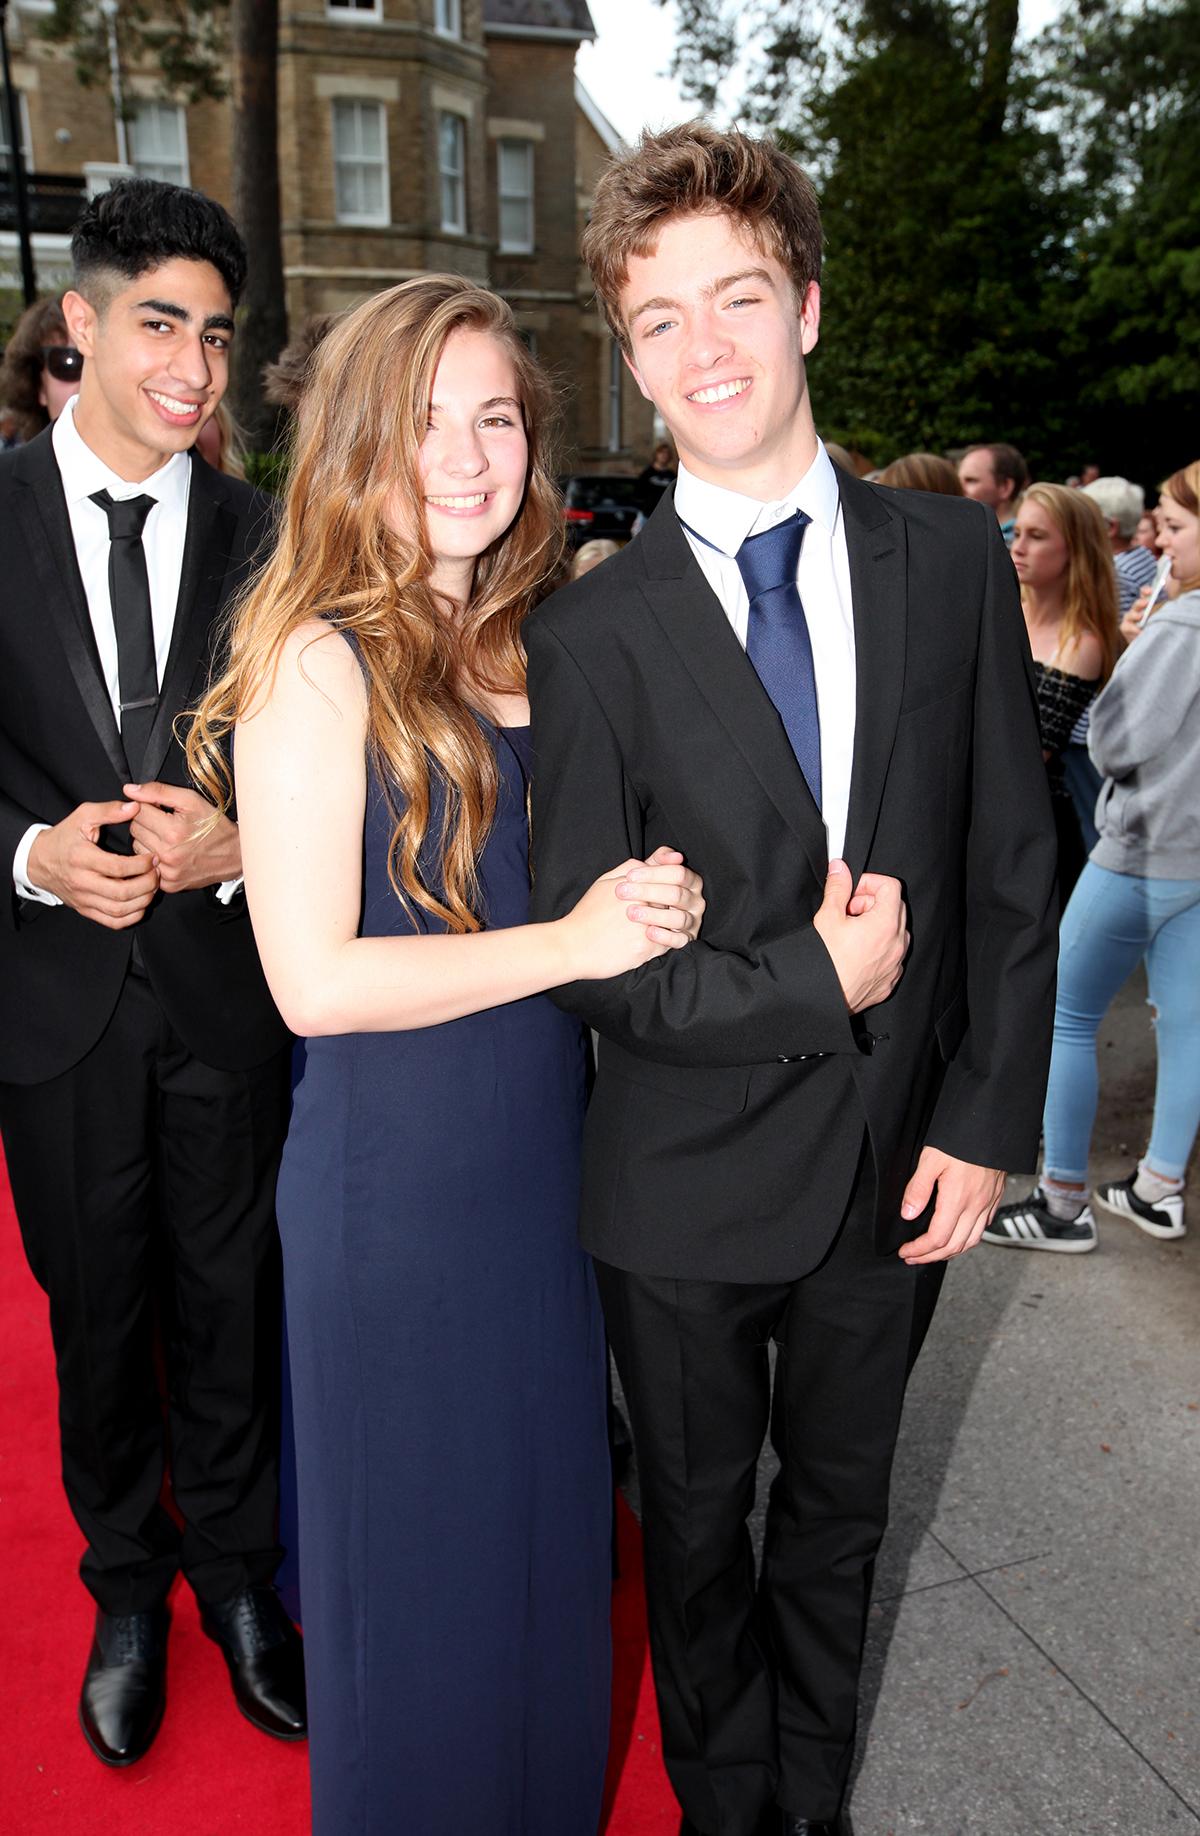 Photos from the Ringwood School's Year 11 prom 2015.